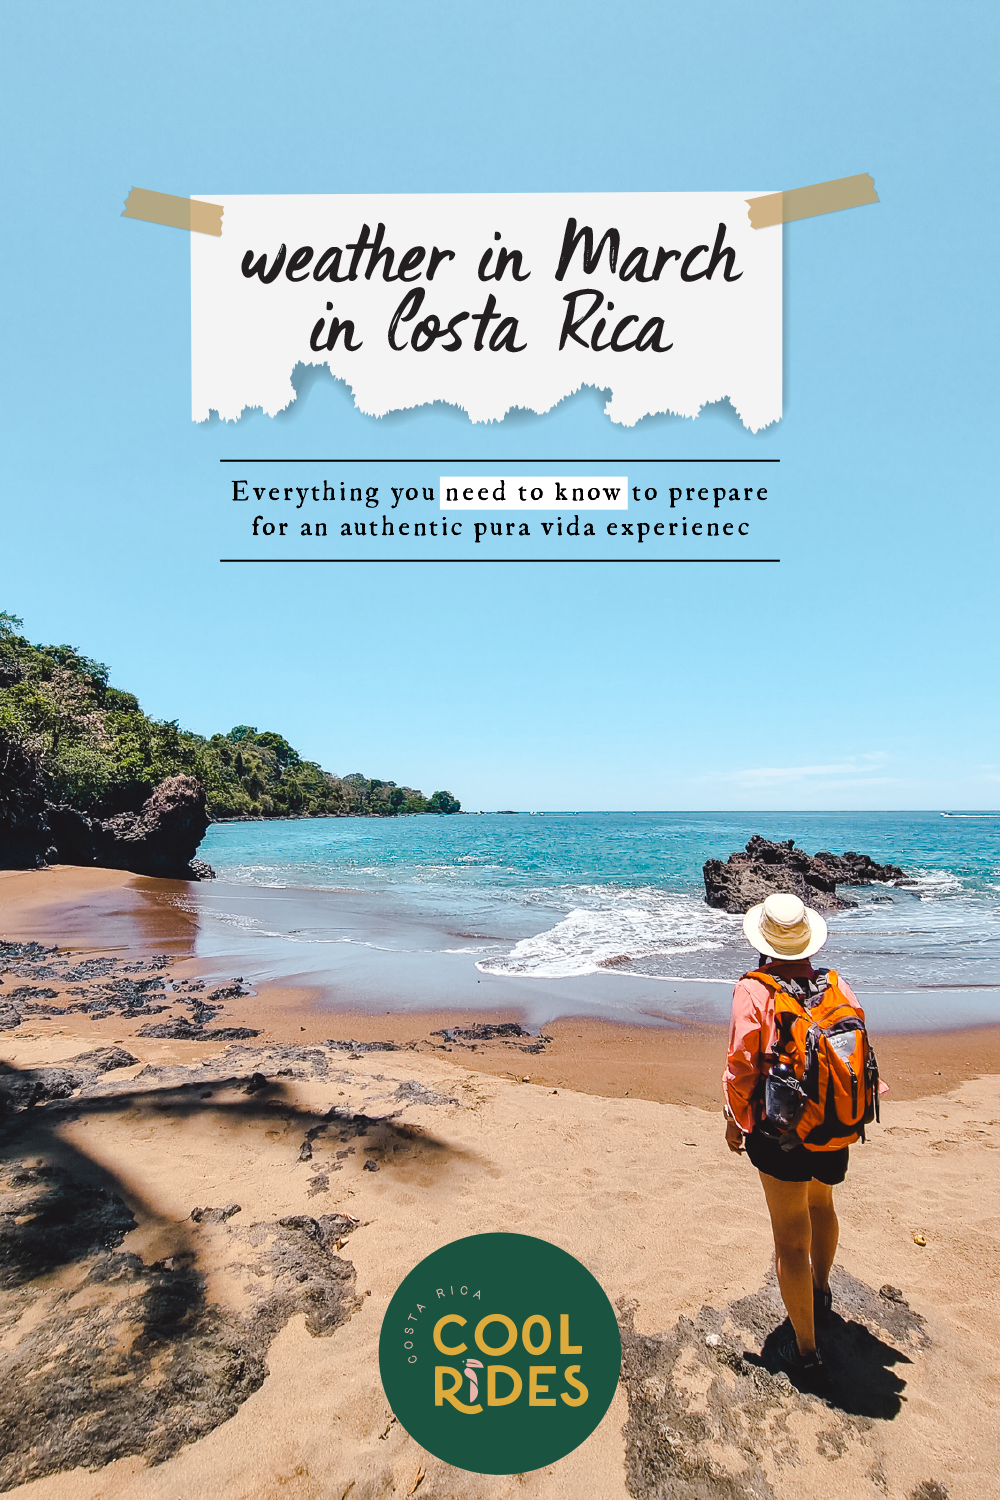 https://www.costaricacoolrides.com/tips-on-planning-a-trip-to-costa-rica/planning-a-costa-rica-trip-in-march-how-to-plan-your-best-itinerary
